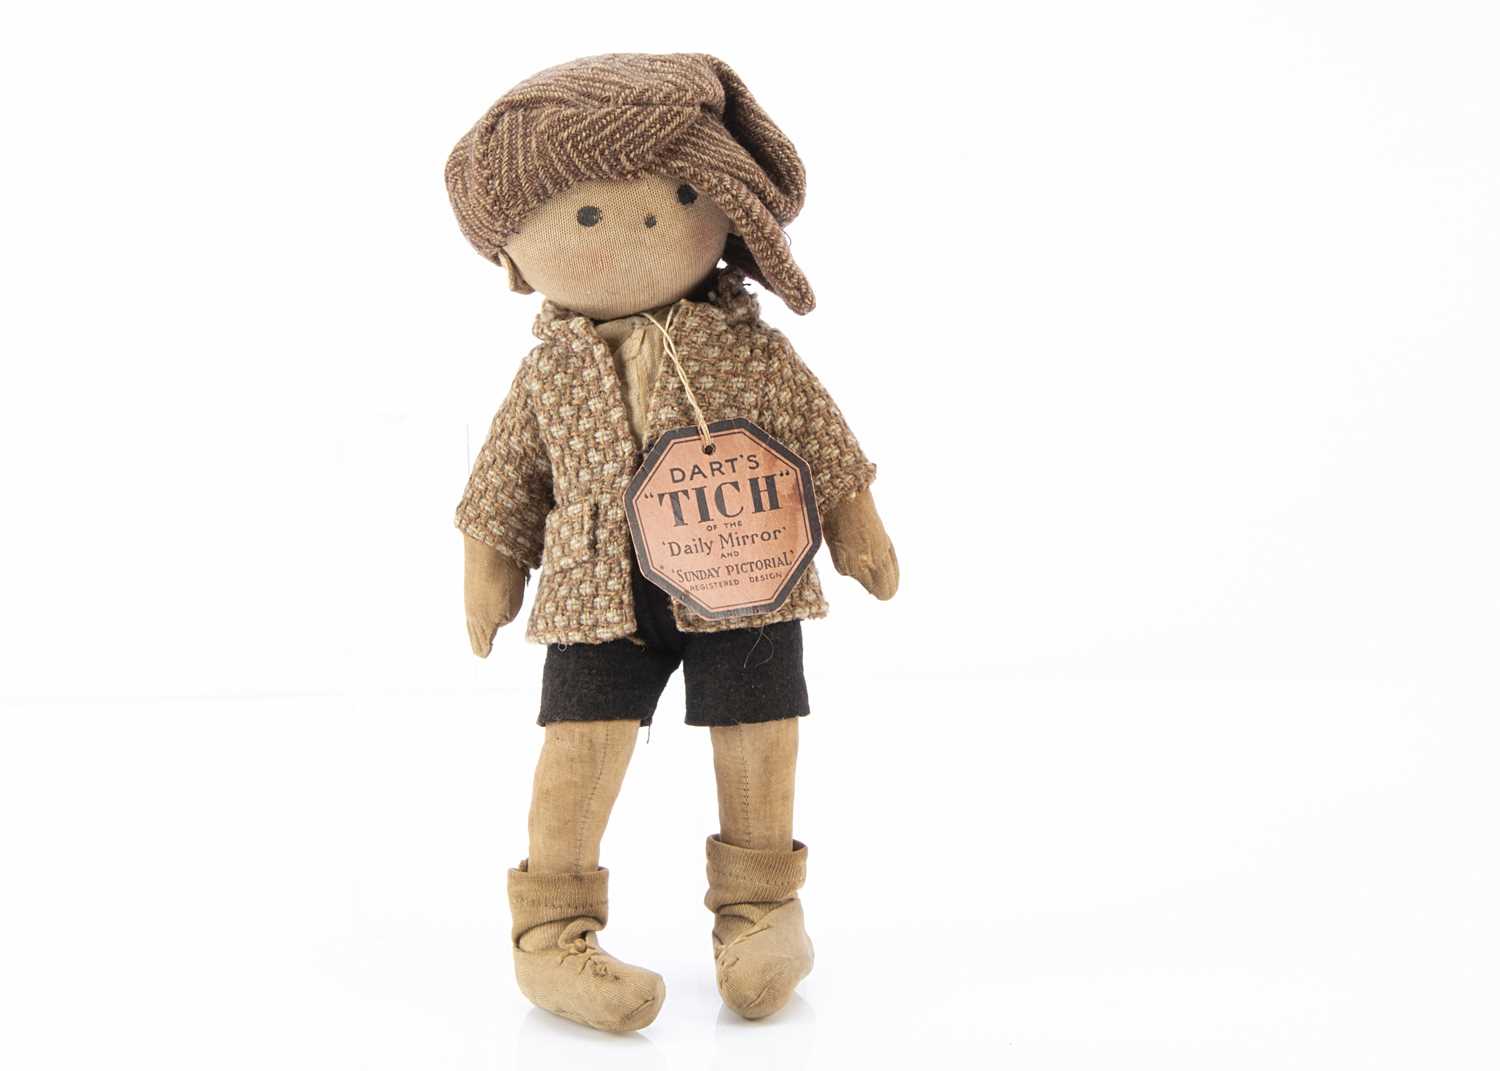 Lot 153 - A rare Chad Valley Dart’s Tich cloth doll early 1930s